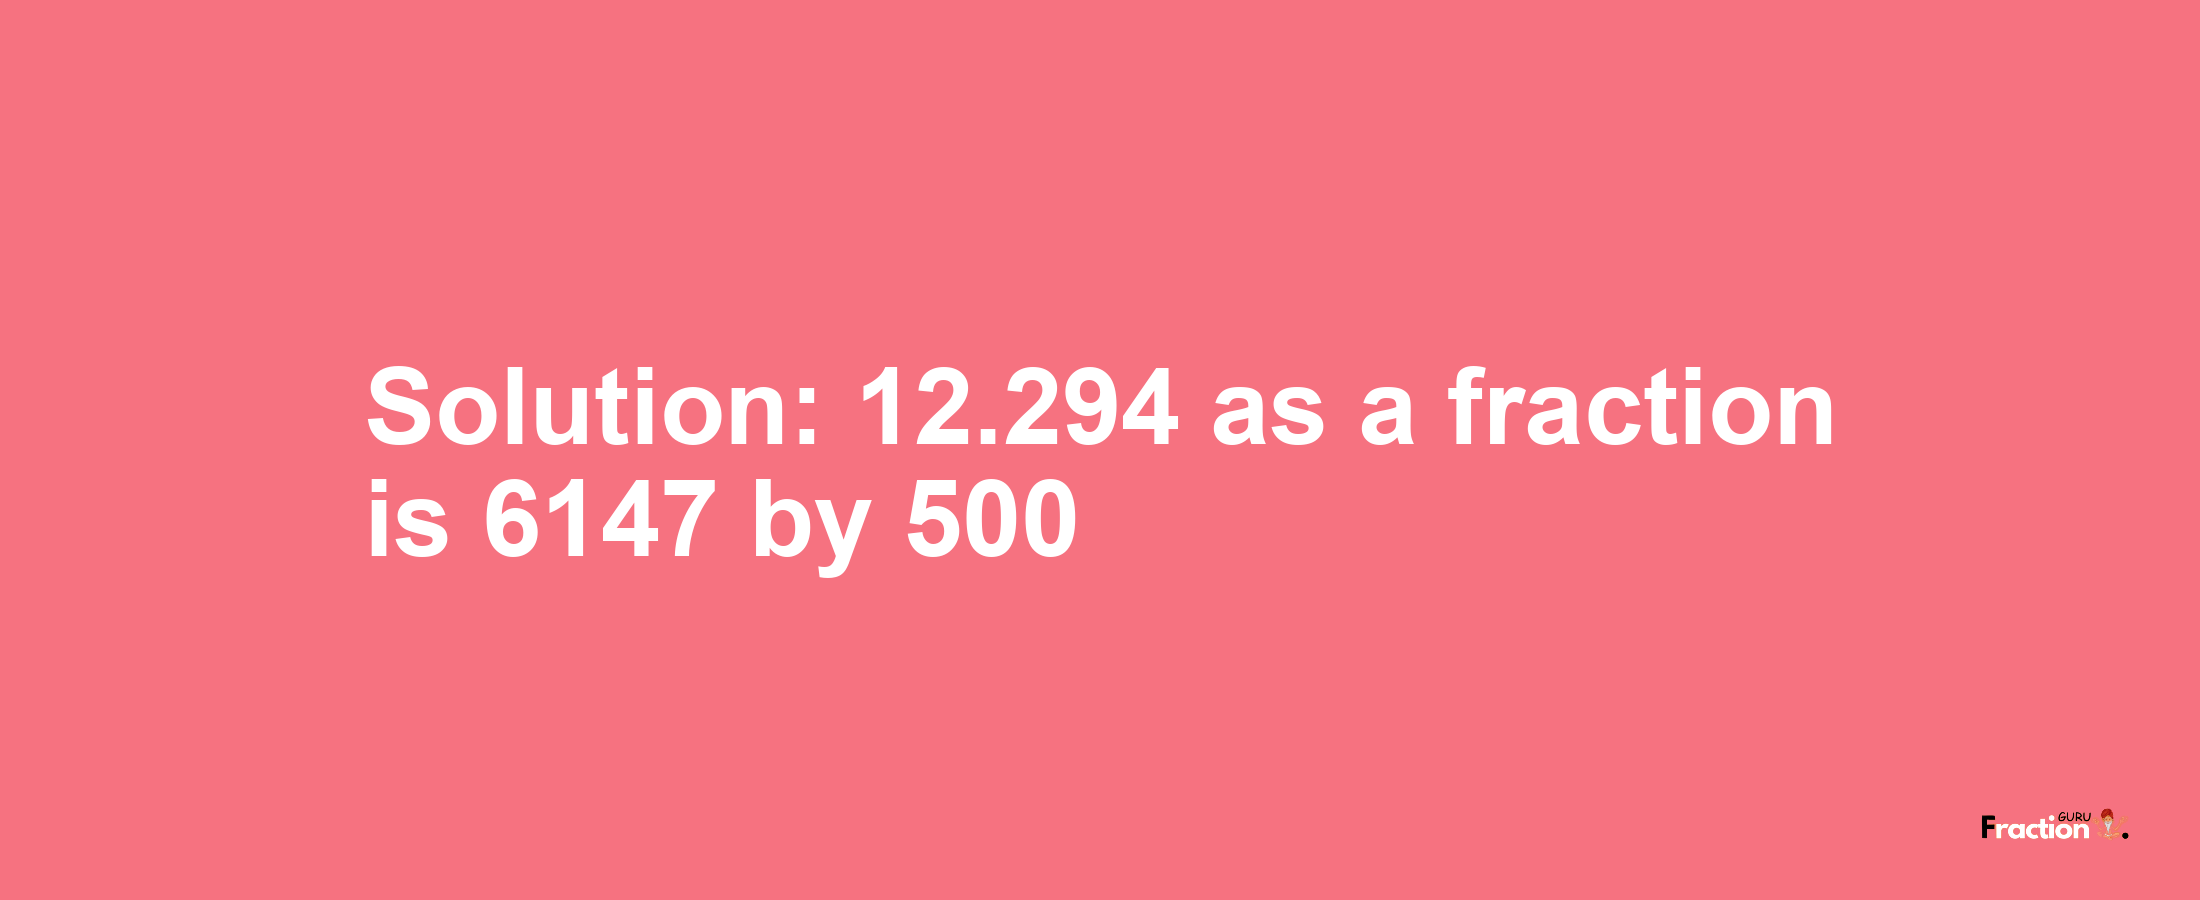 Solution:12.294 as a fraction is 6147/500